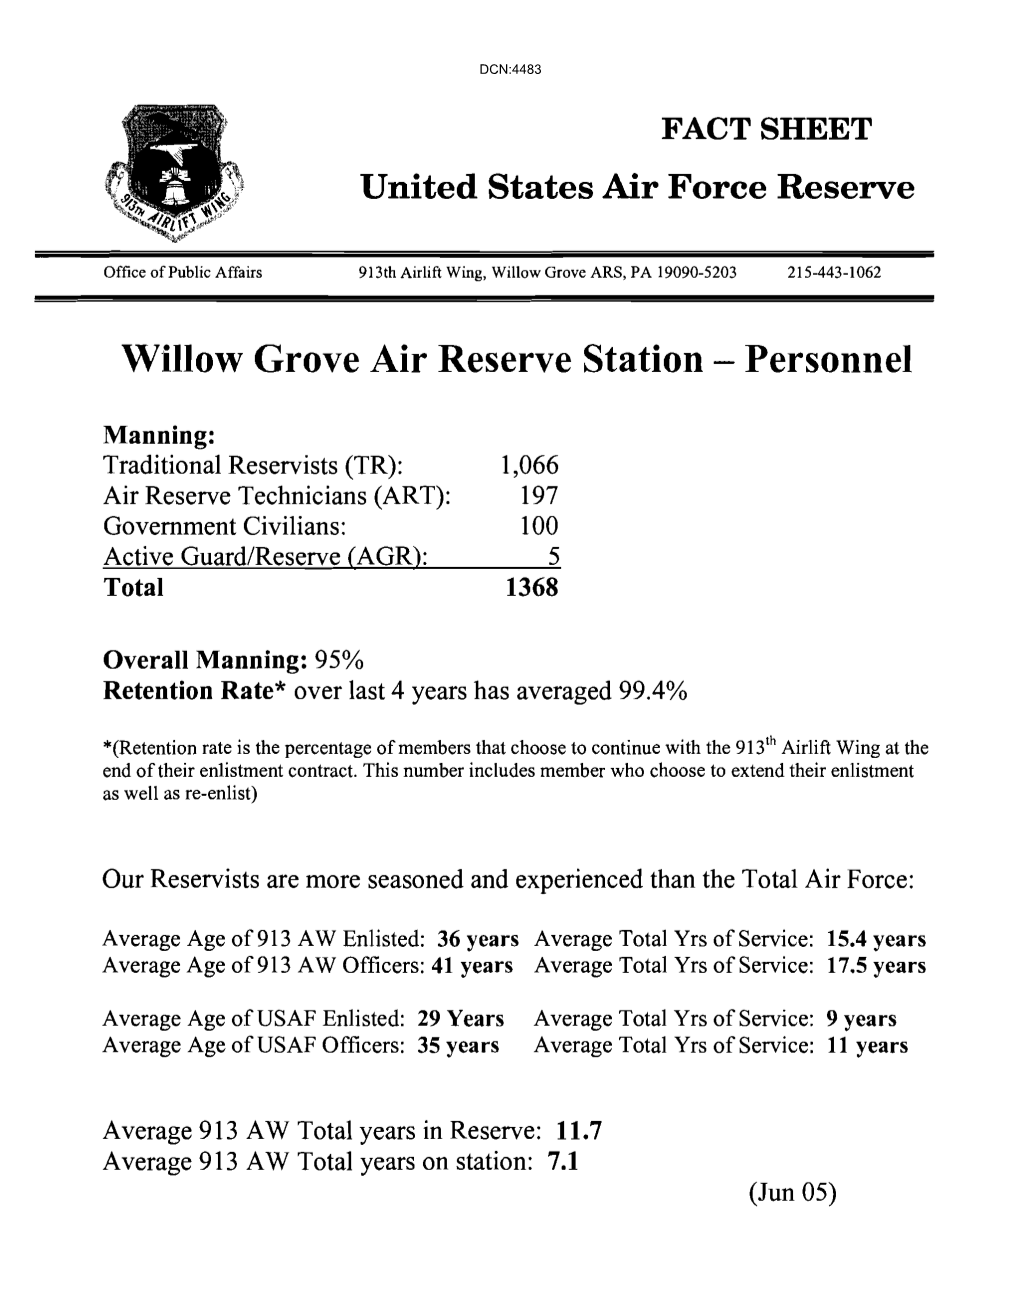 Willow Grove Air Reserve Station - Personnel